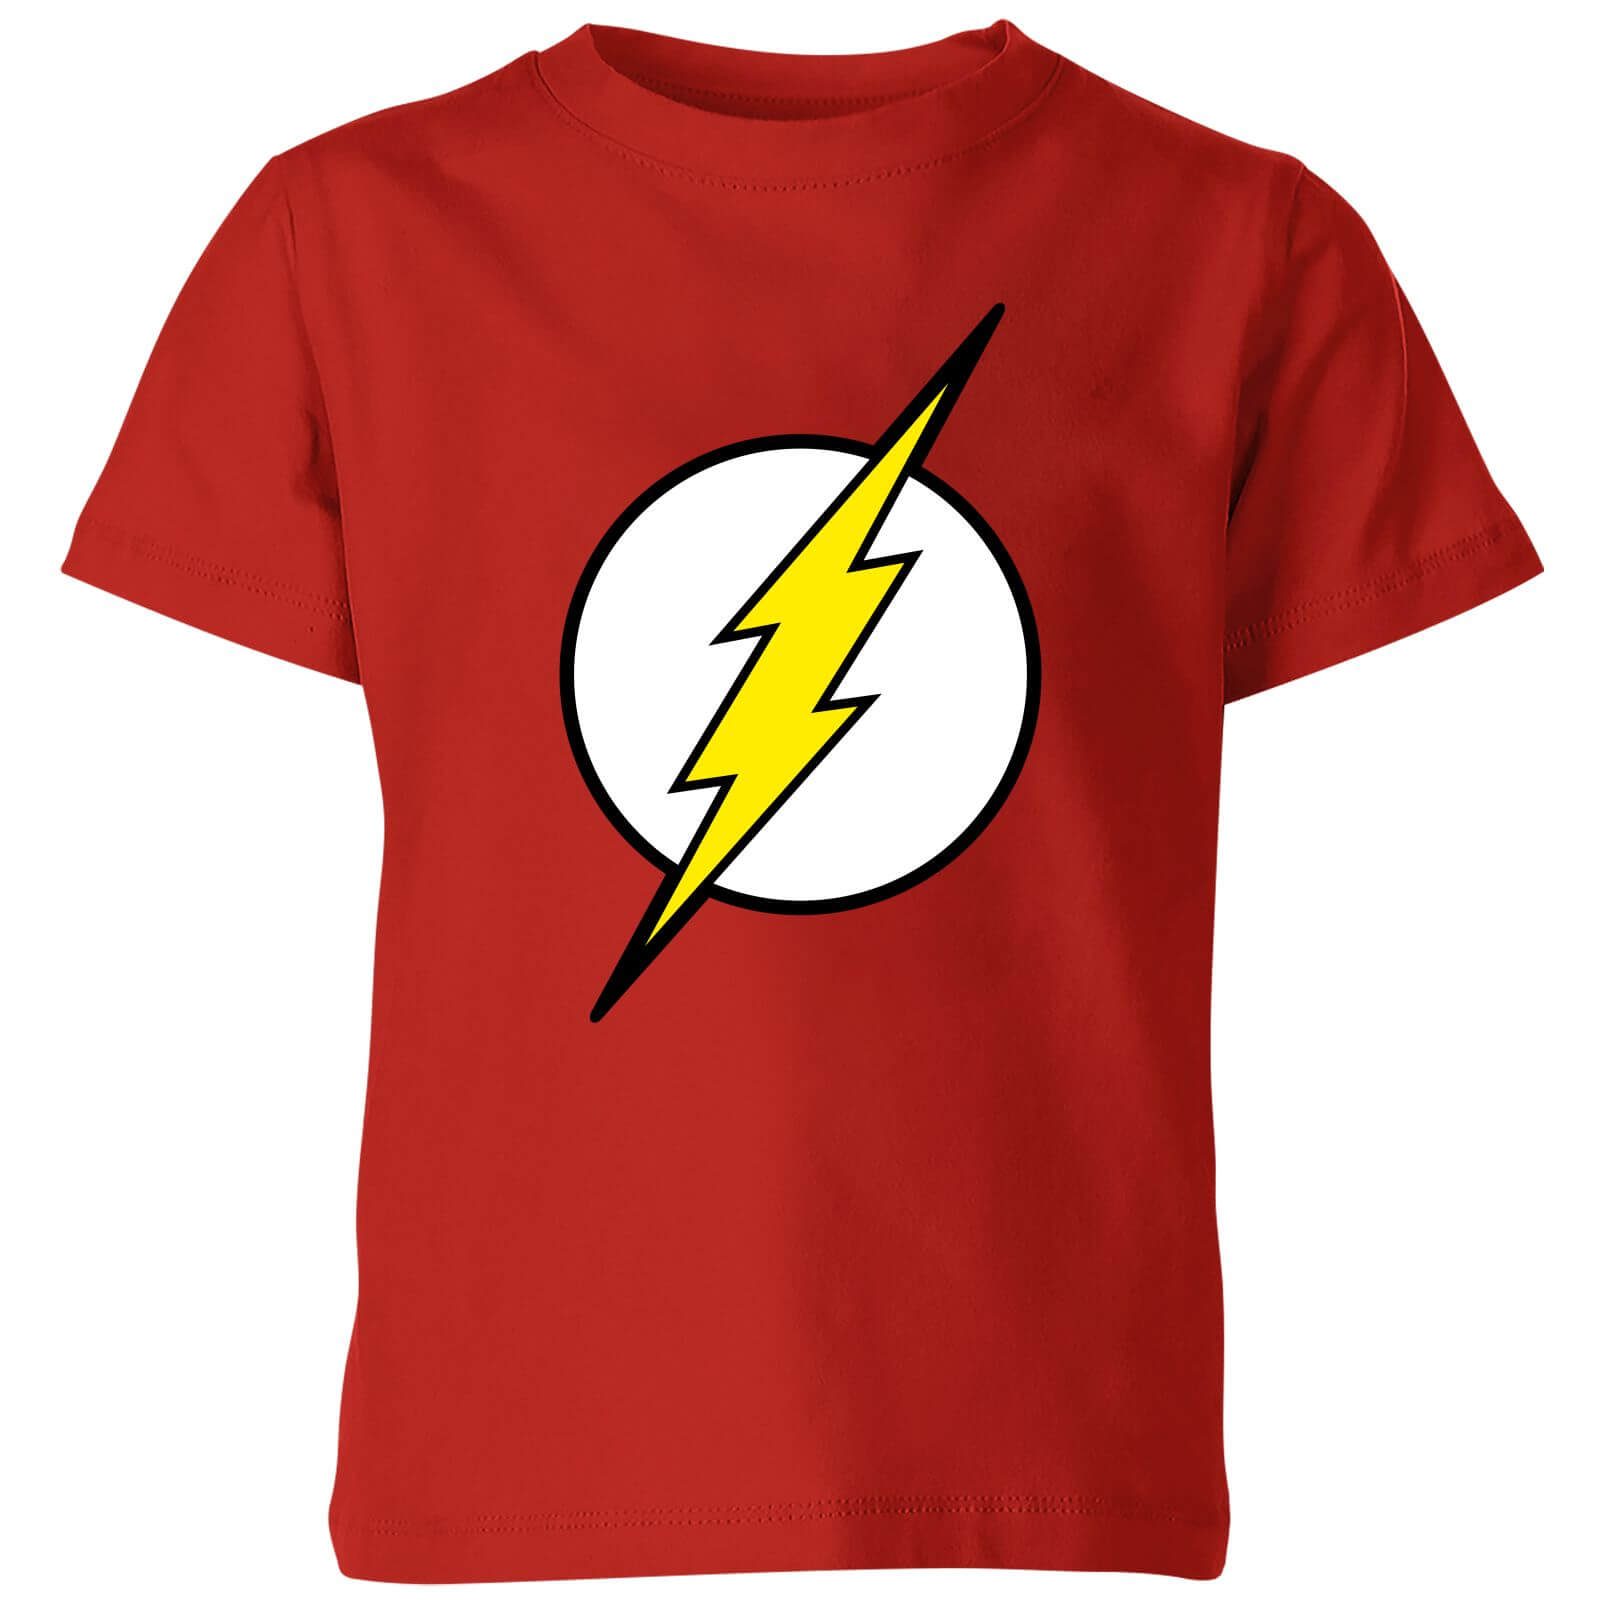 DC Comics Justice League Flash Logo Kids' T-Shirt - Red - 3-4 Years - Red